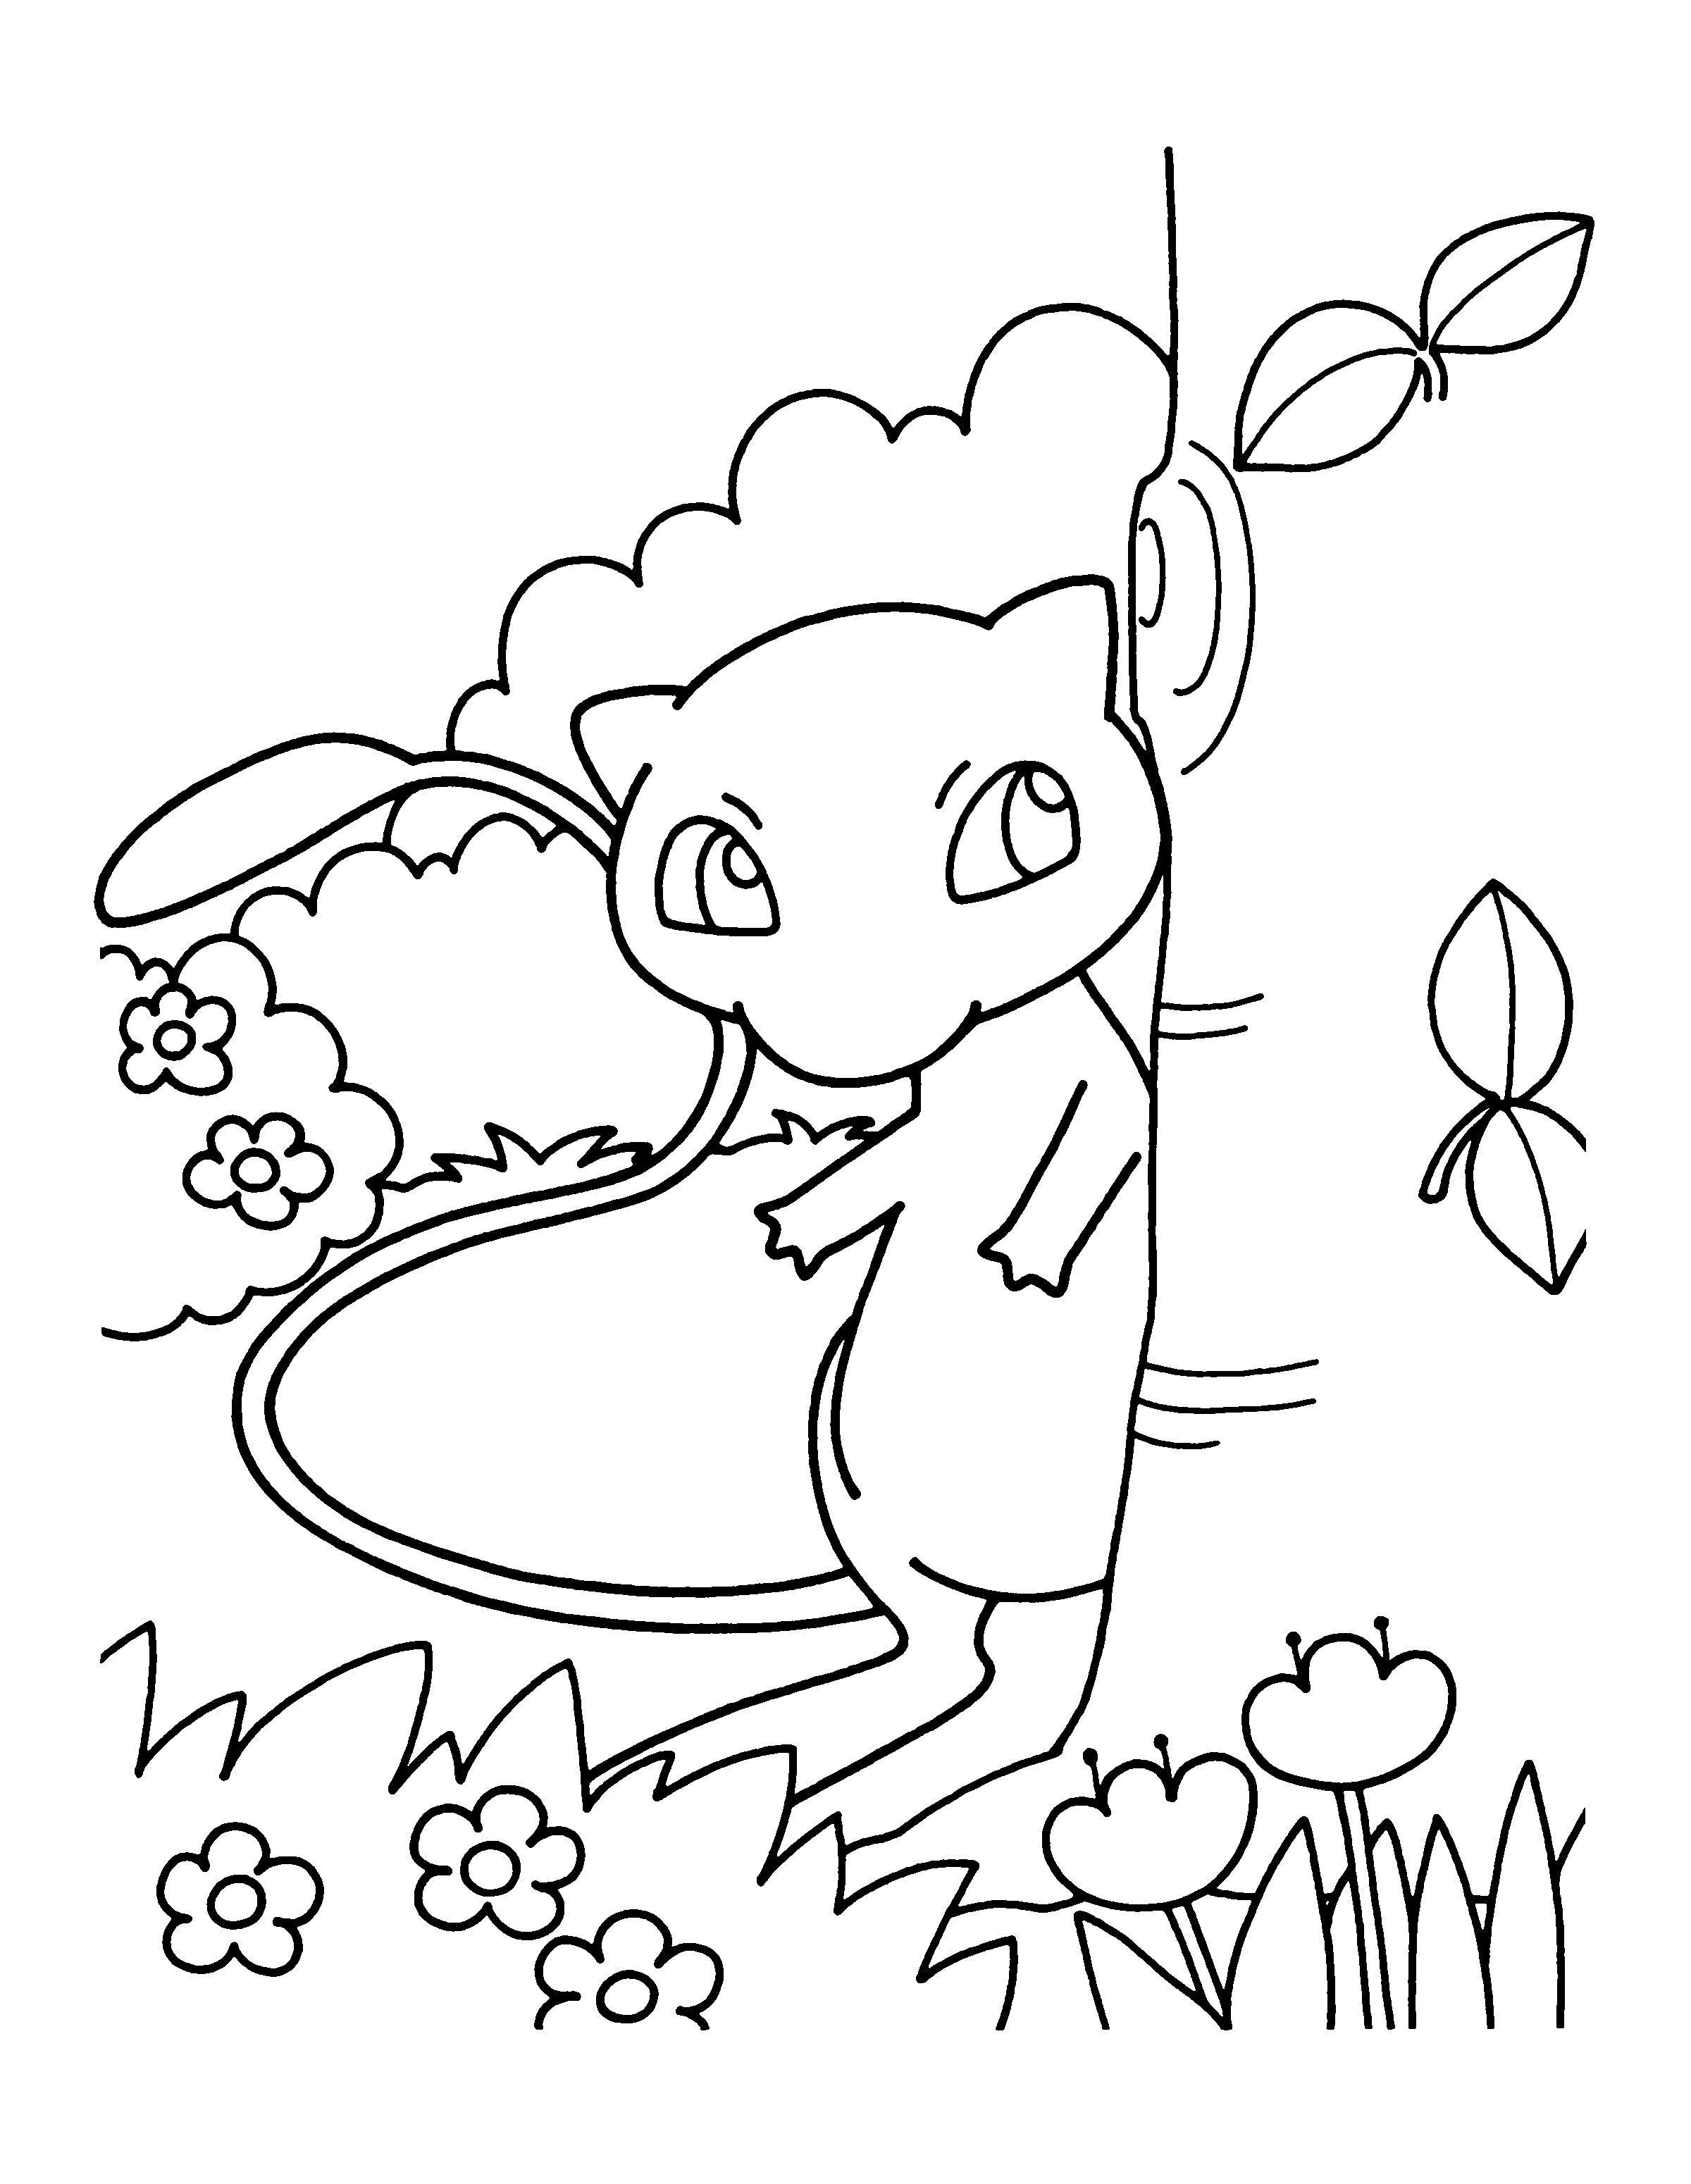 pokemon mew coloring pages mew pokemon coloring page free pokémon coloring pages coloring pokemon mew pages 